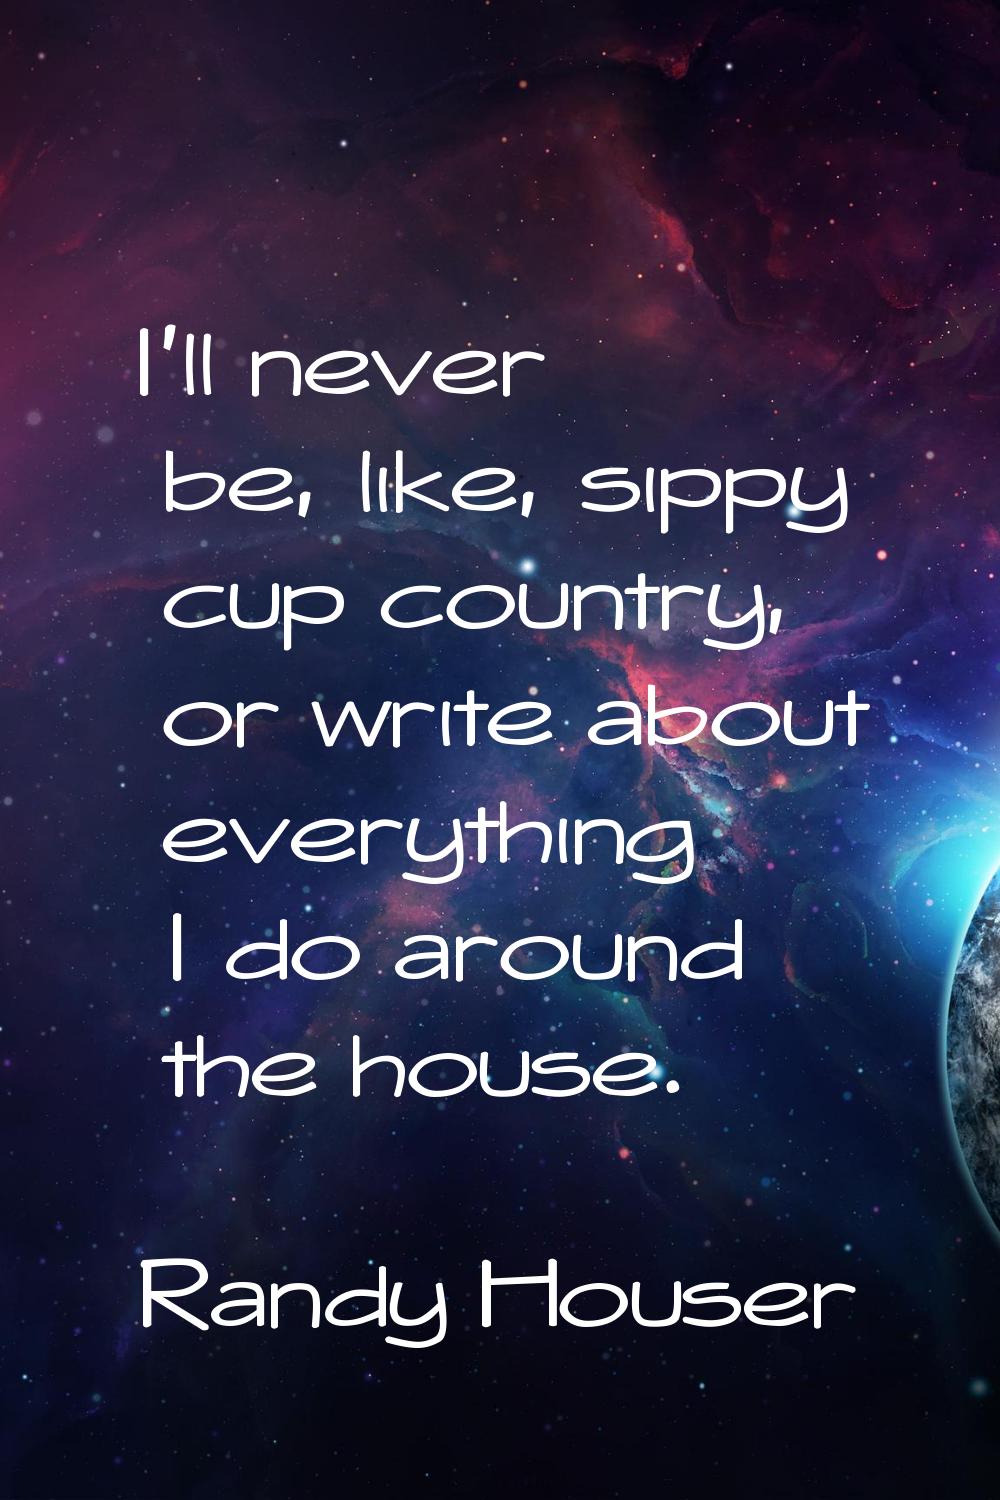 I'll never be, like, sippy cup country, or write about everything I do around the house.